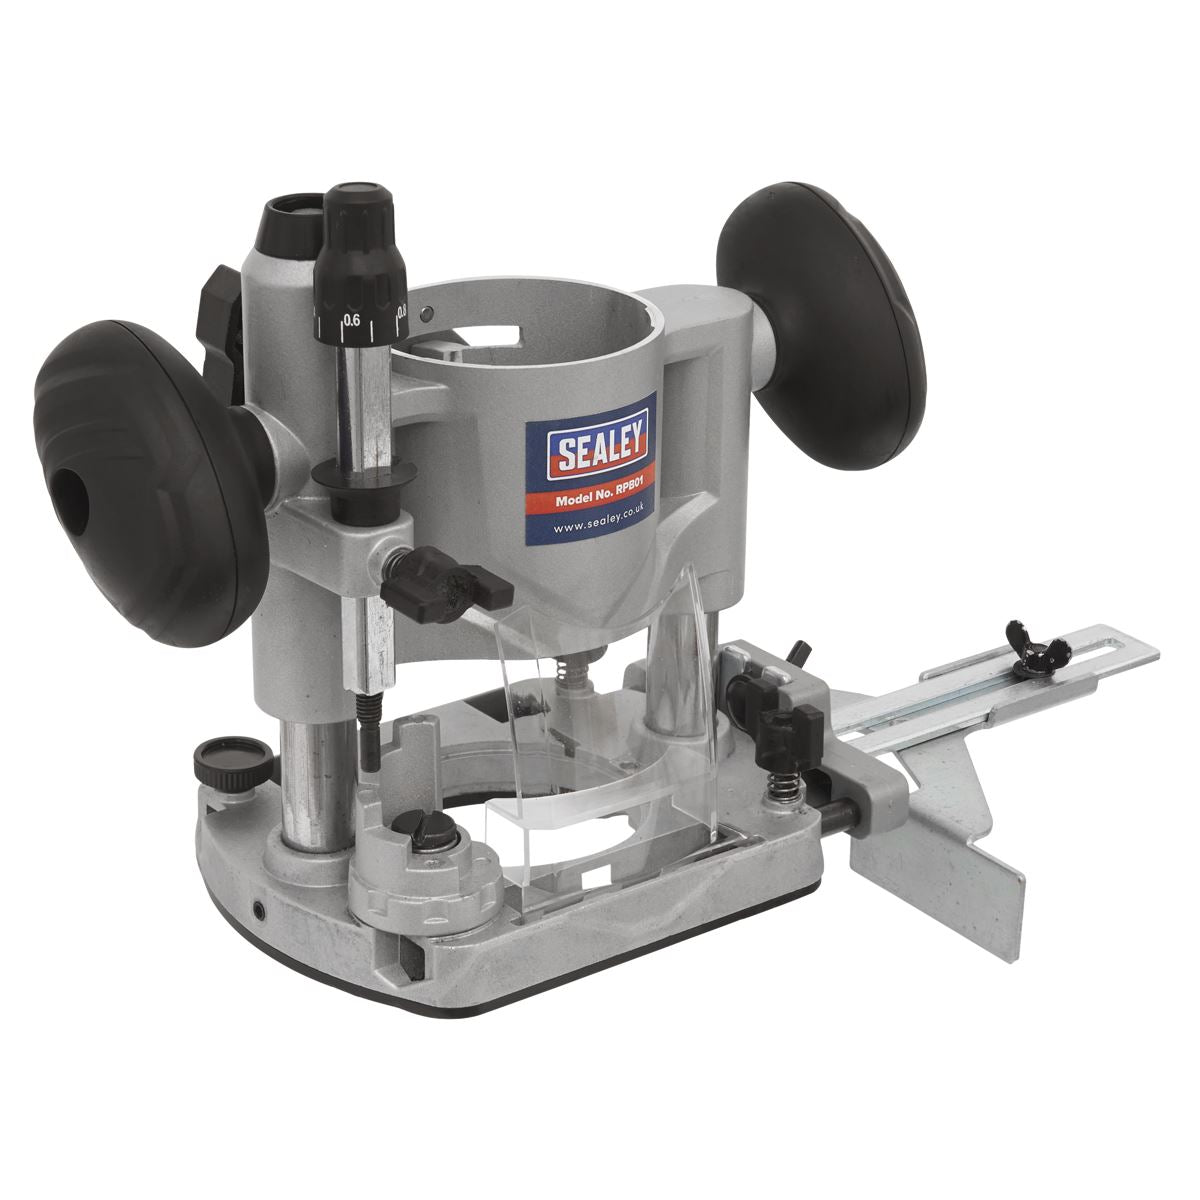 Sealey Router Plunge Base